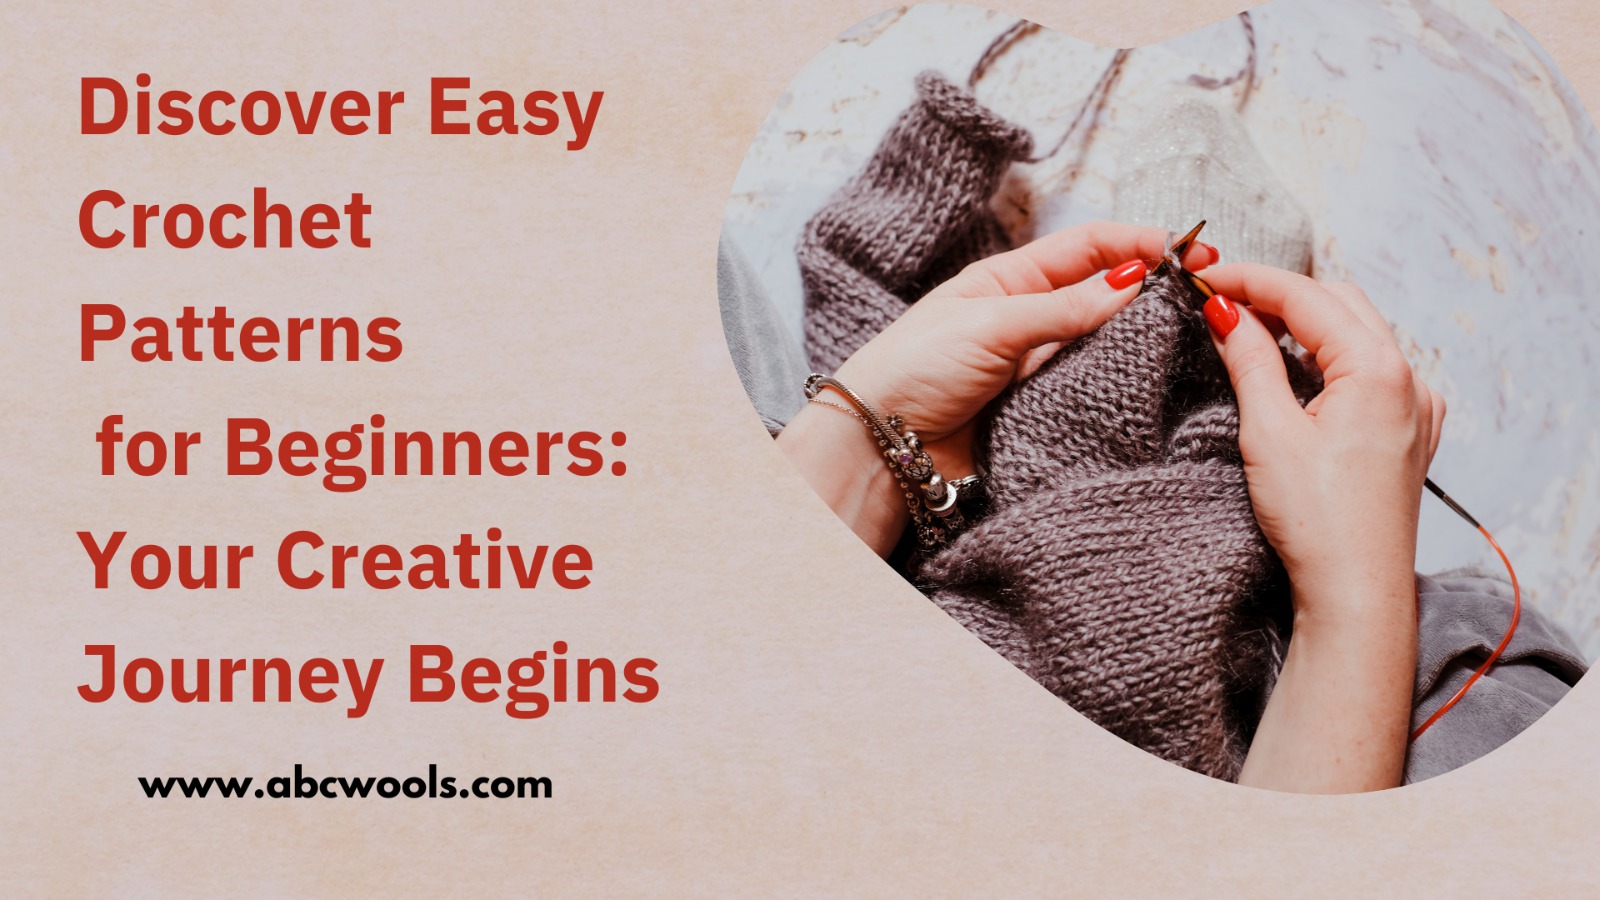 Discover Easy Crochet Patterns for Beginners Your Creative Journey Begins